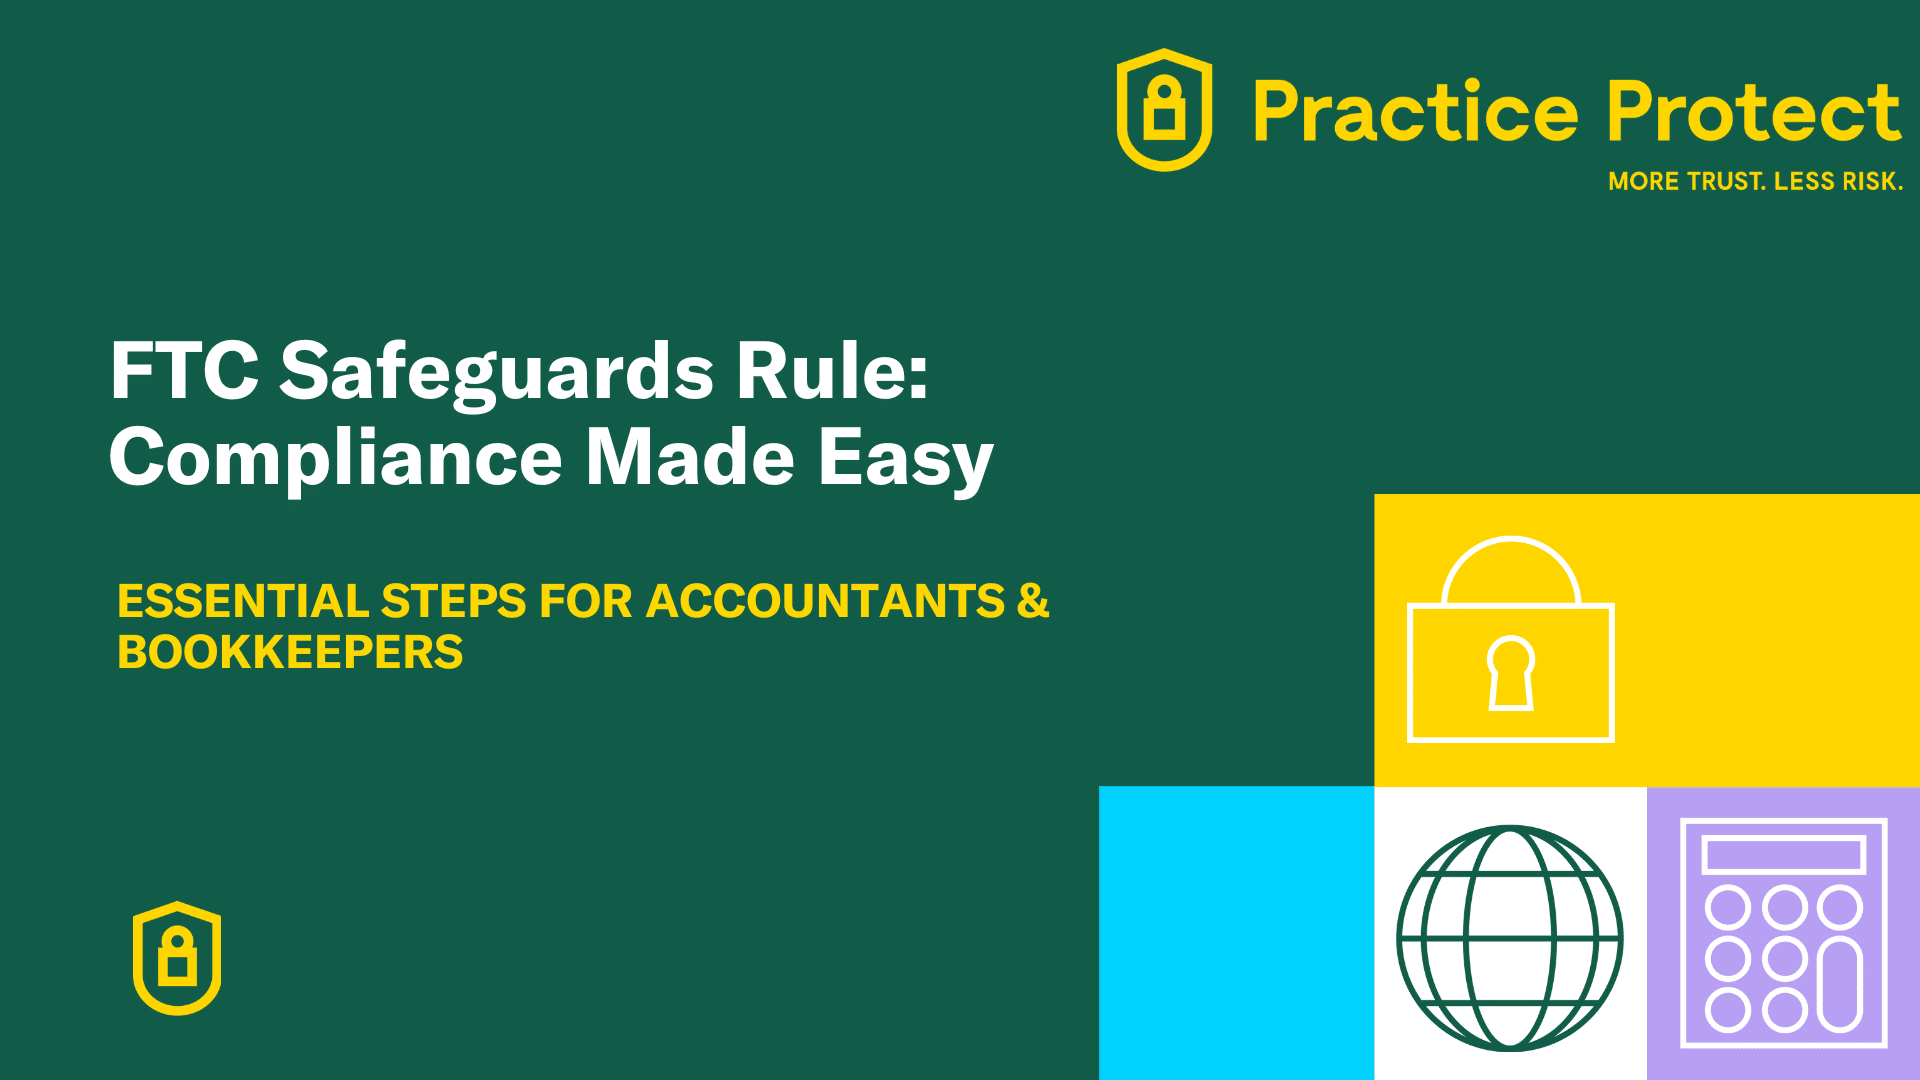 FTC Safeguards Rule Compliance Made Easy